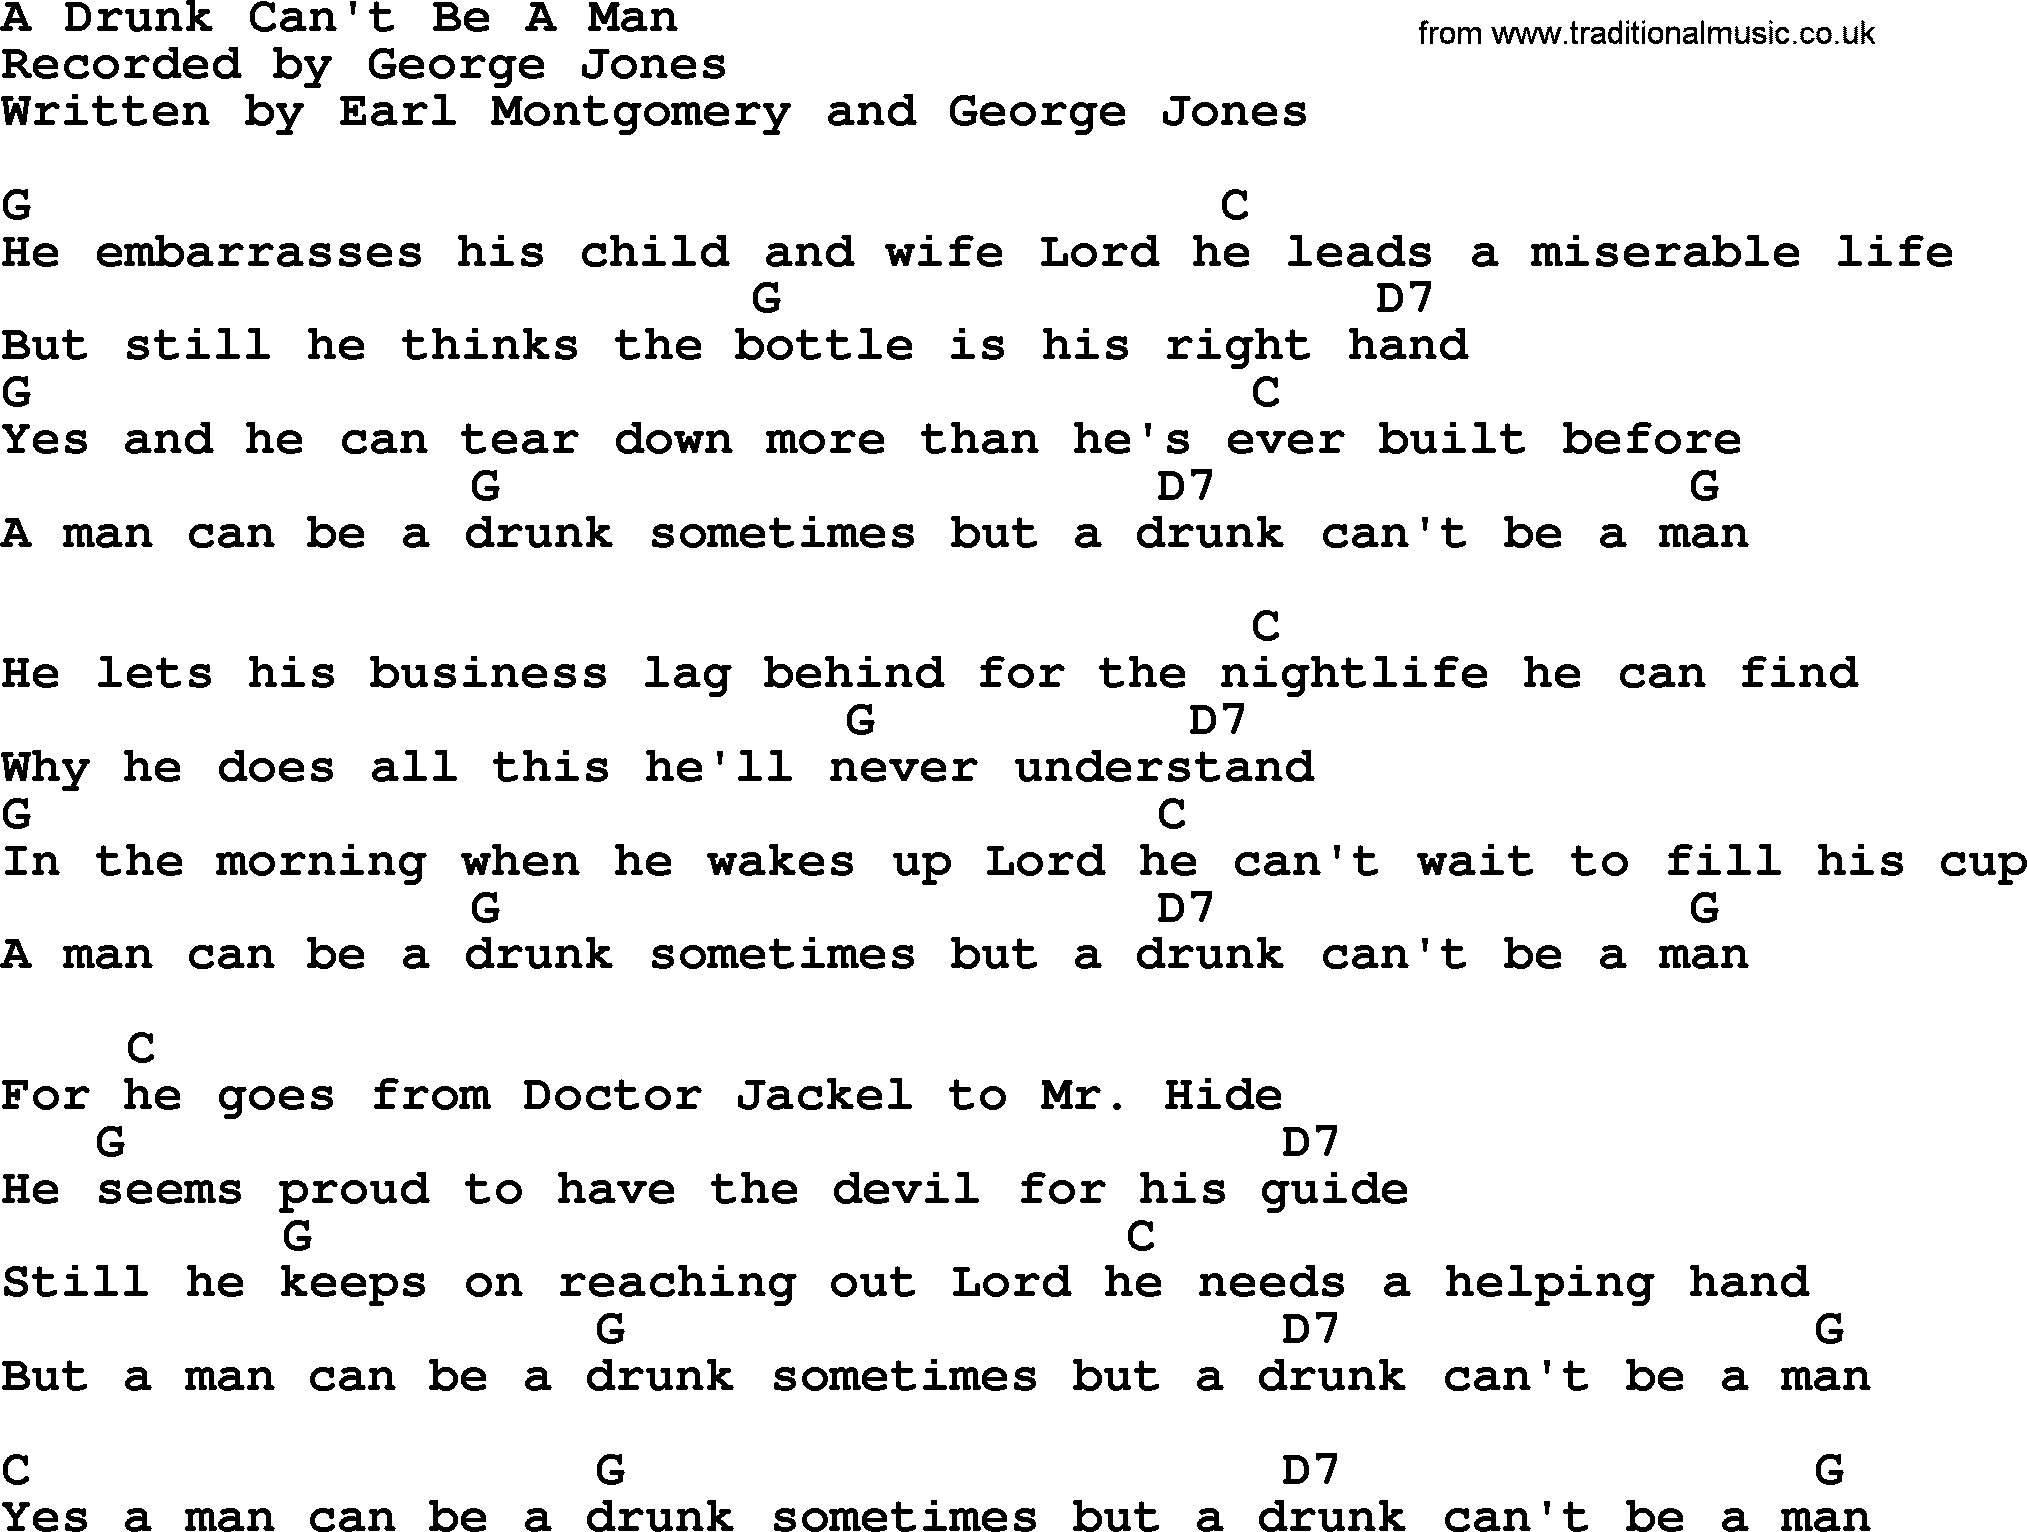 George Jones song: A Drunk Can't Be A Man, lyrics and chords